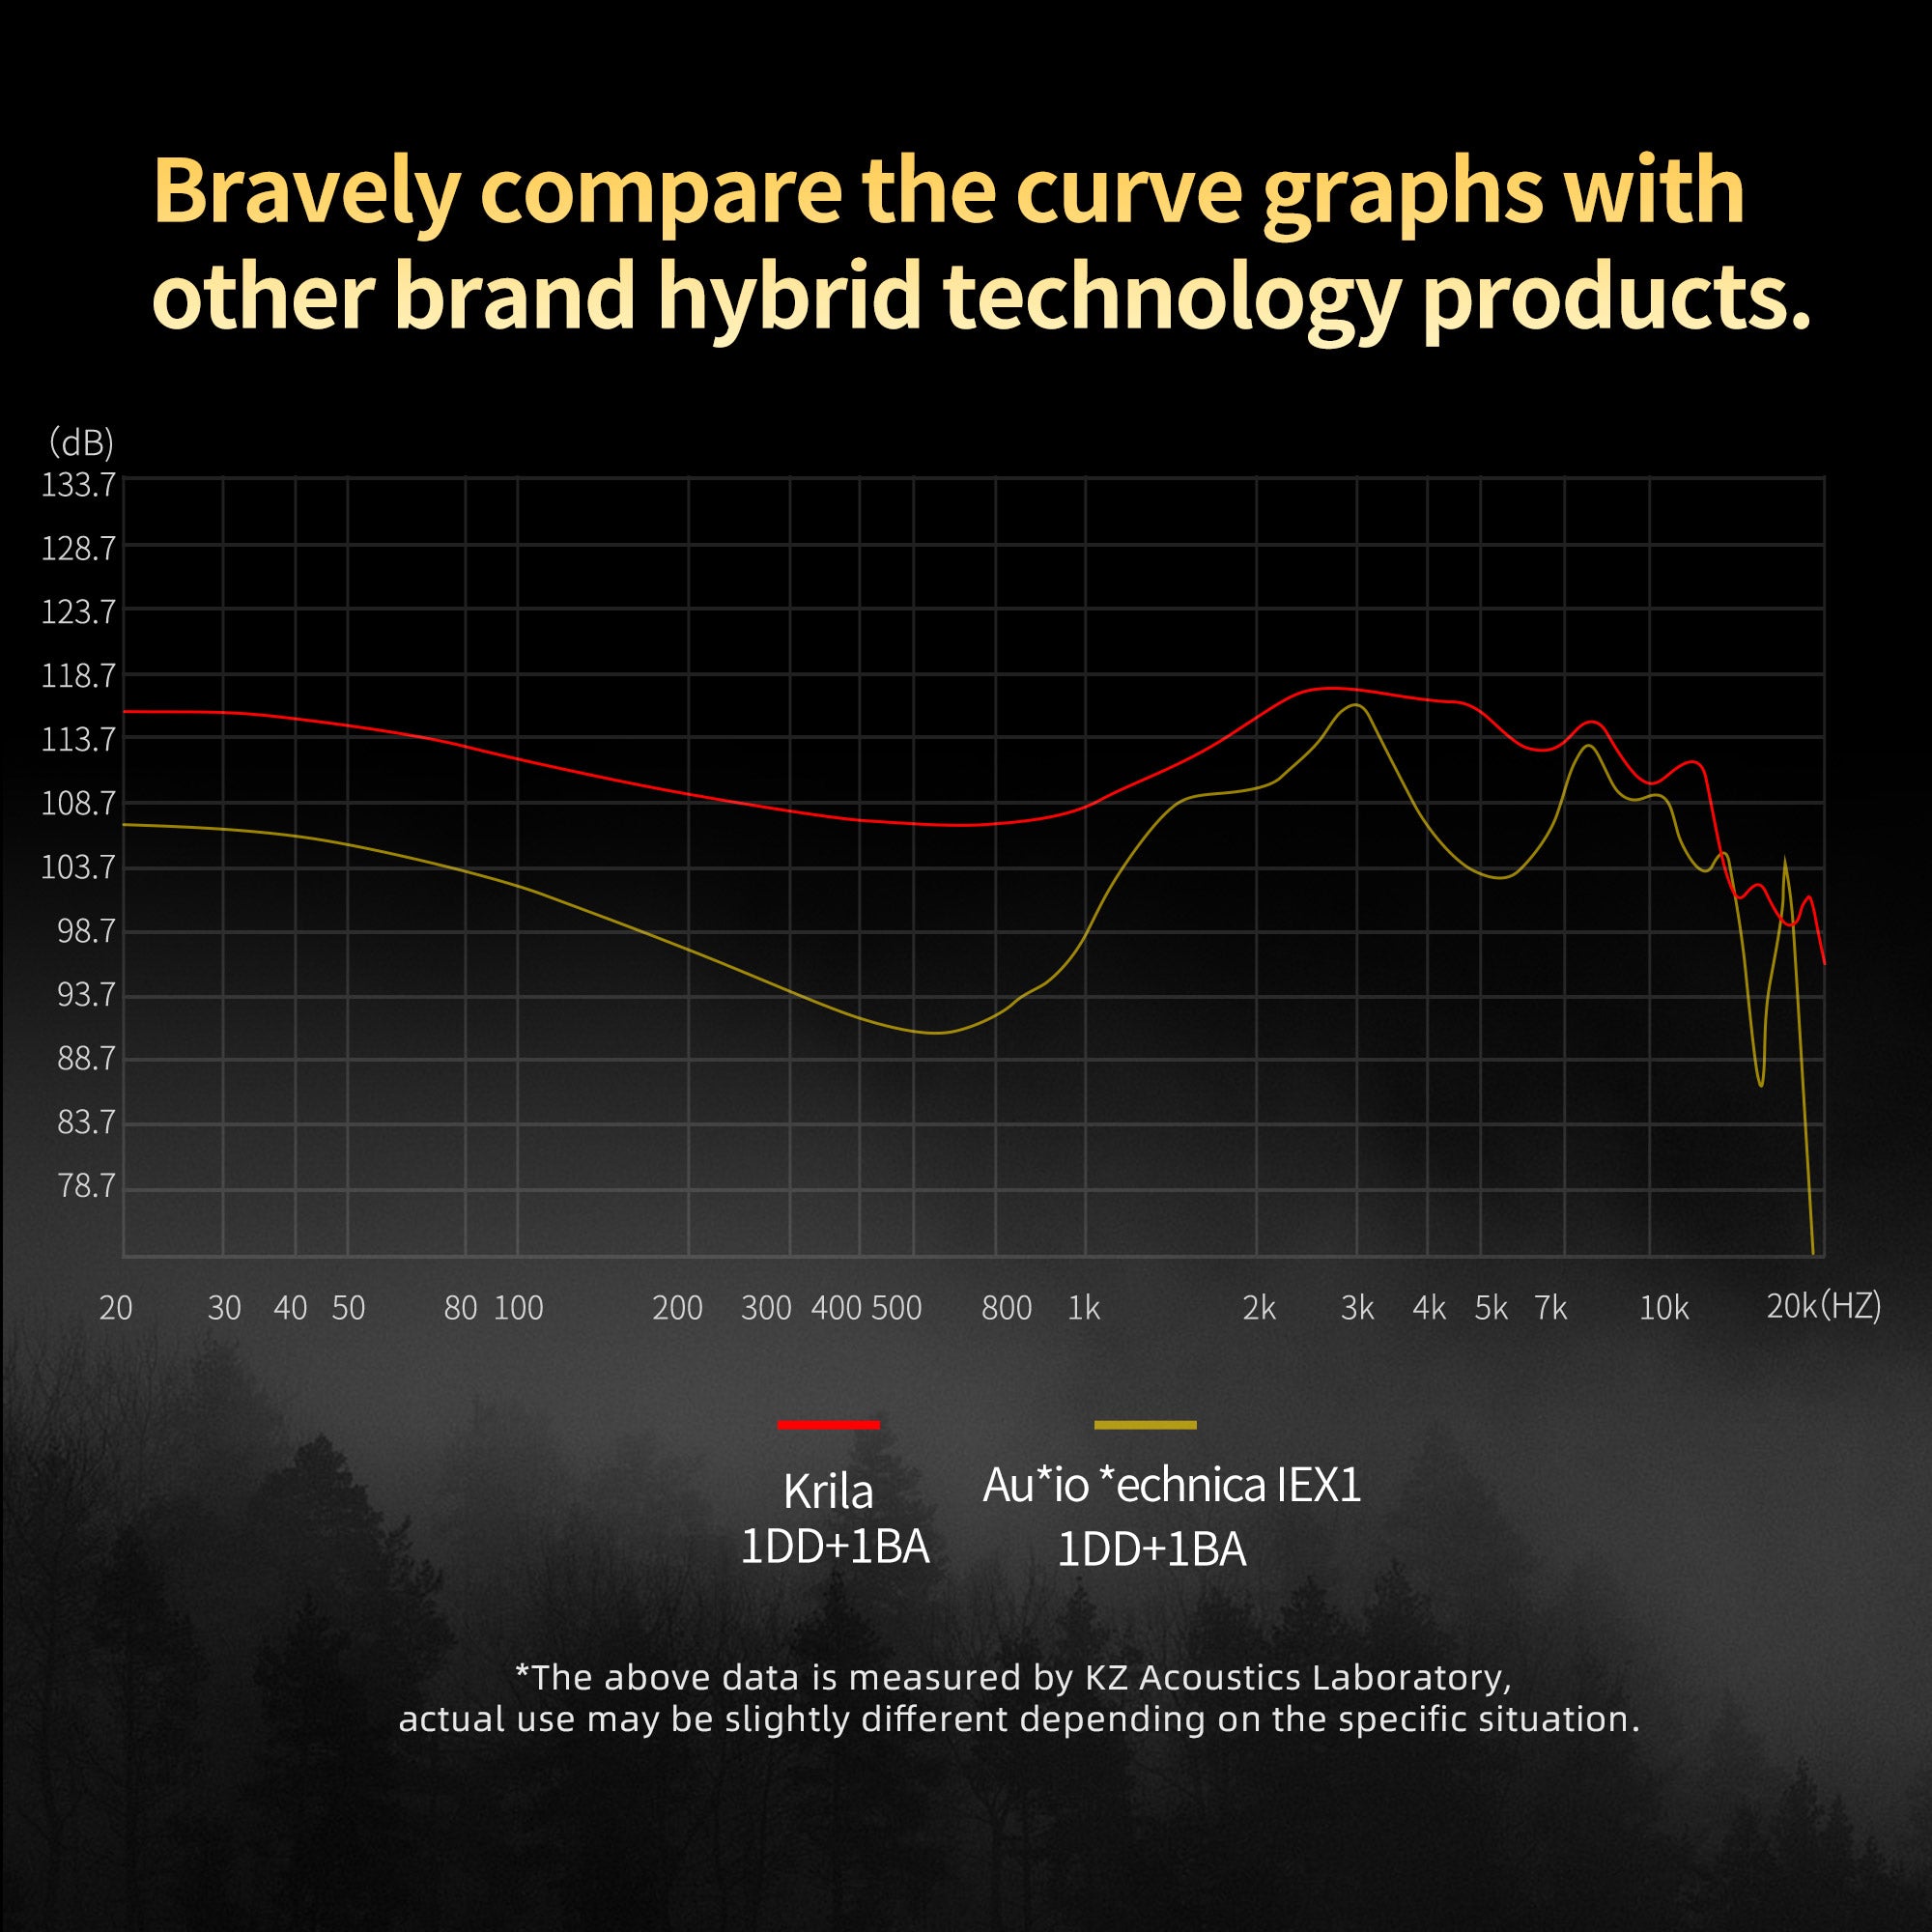 Bravely compare the curve graphs with other brand hybrid technology products.